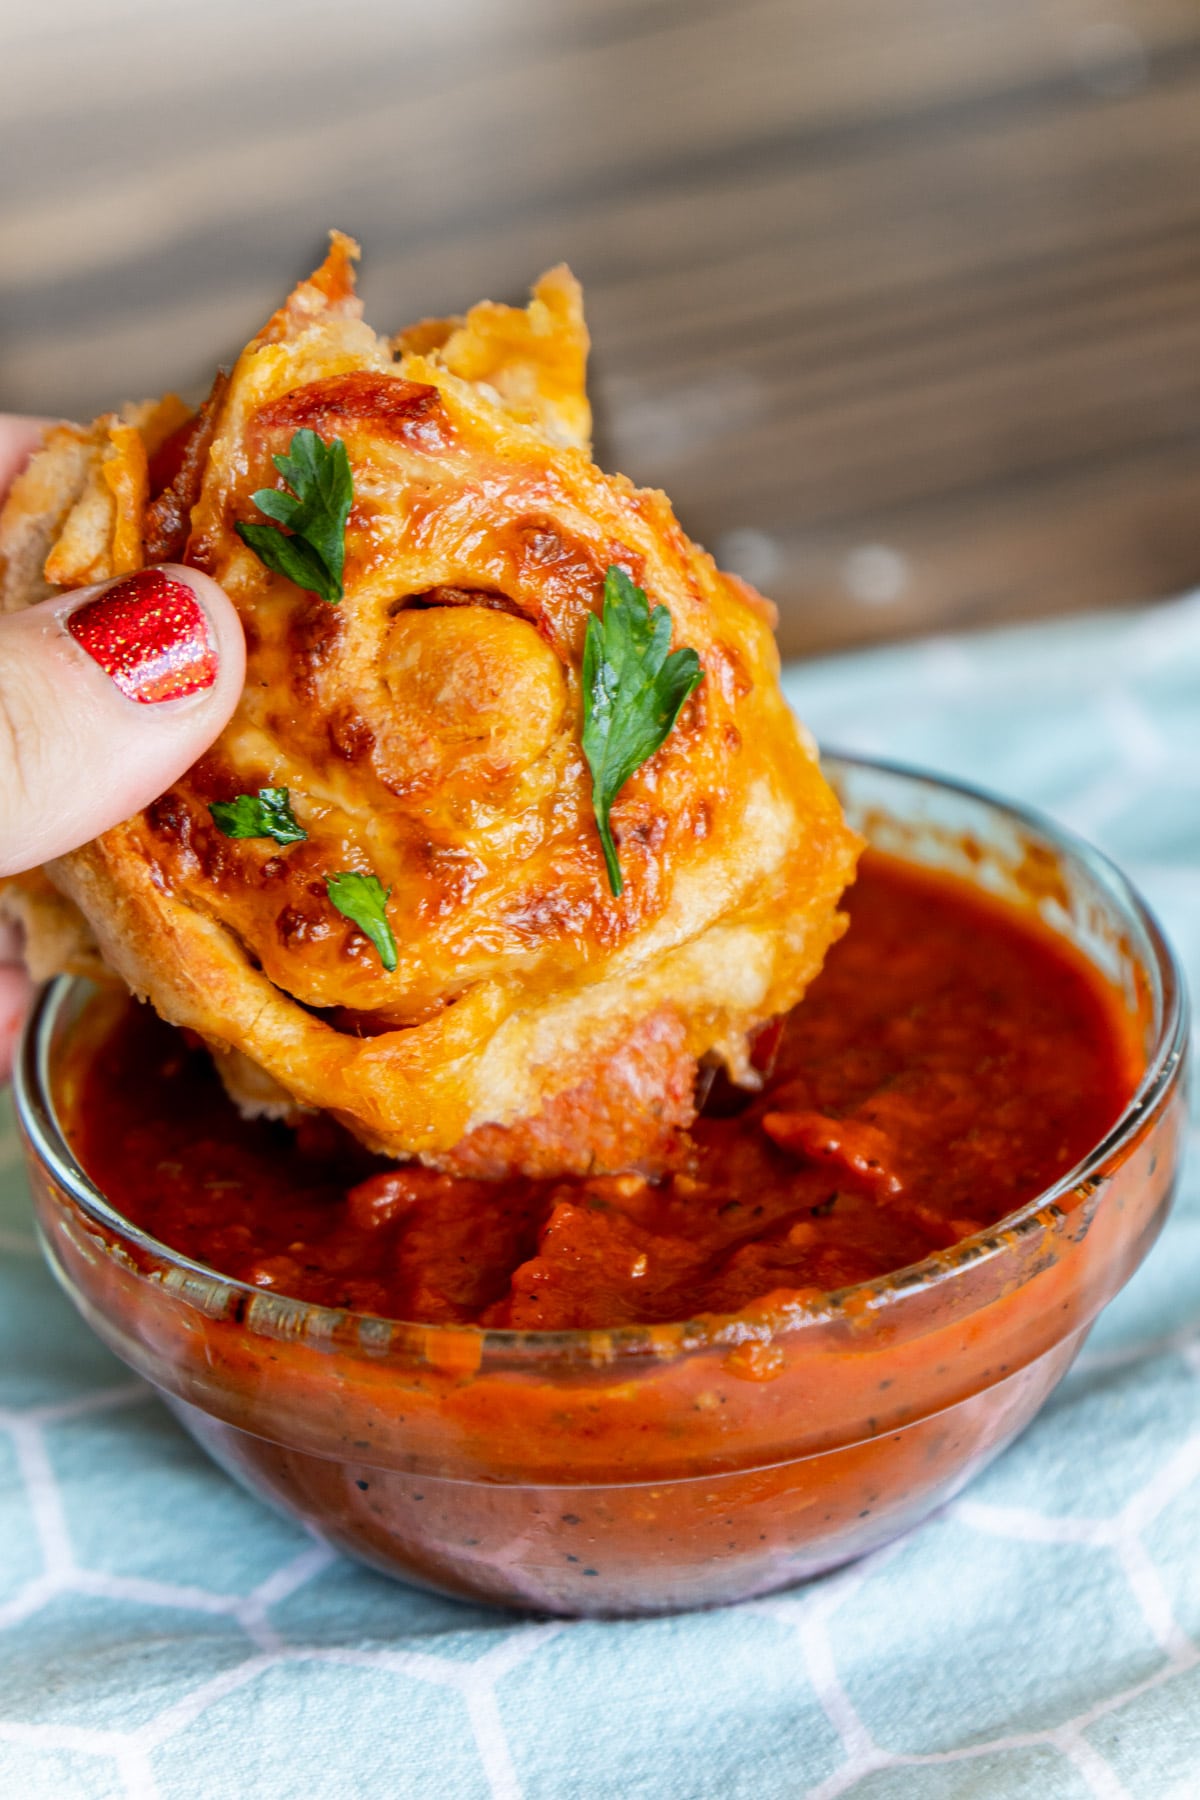 Woman's hand dipping a pepperoni roll into glass bowl of pizza sauce